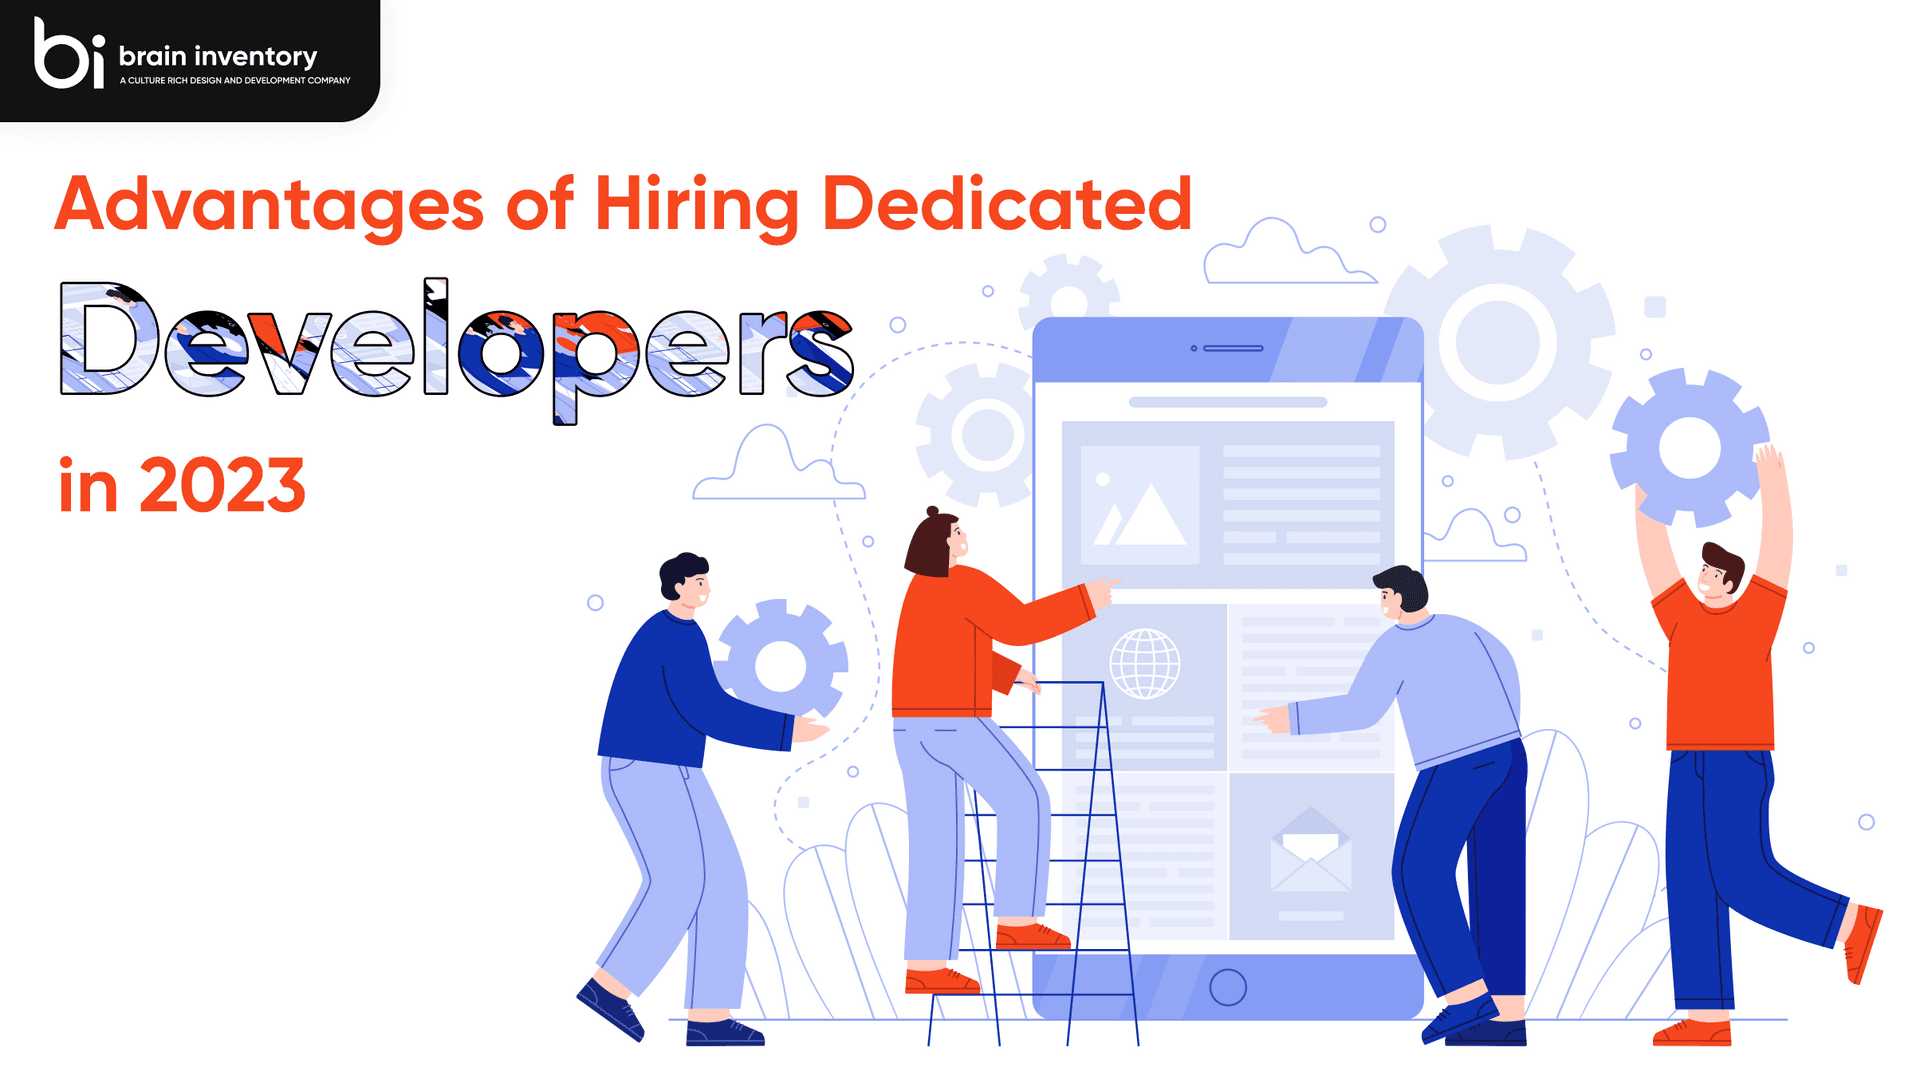 Advantages of Hiring Dedicated Developers in 2023